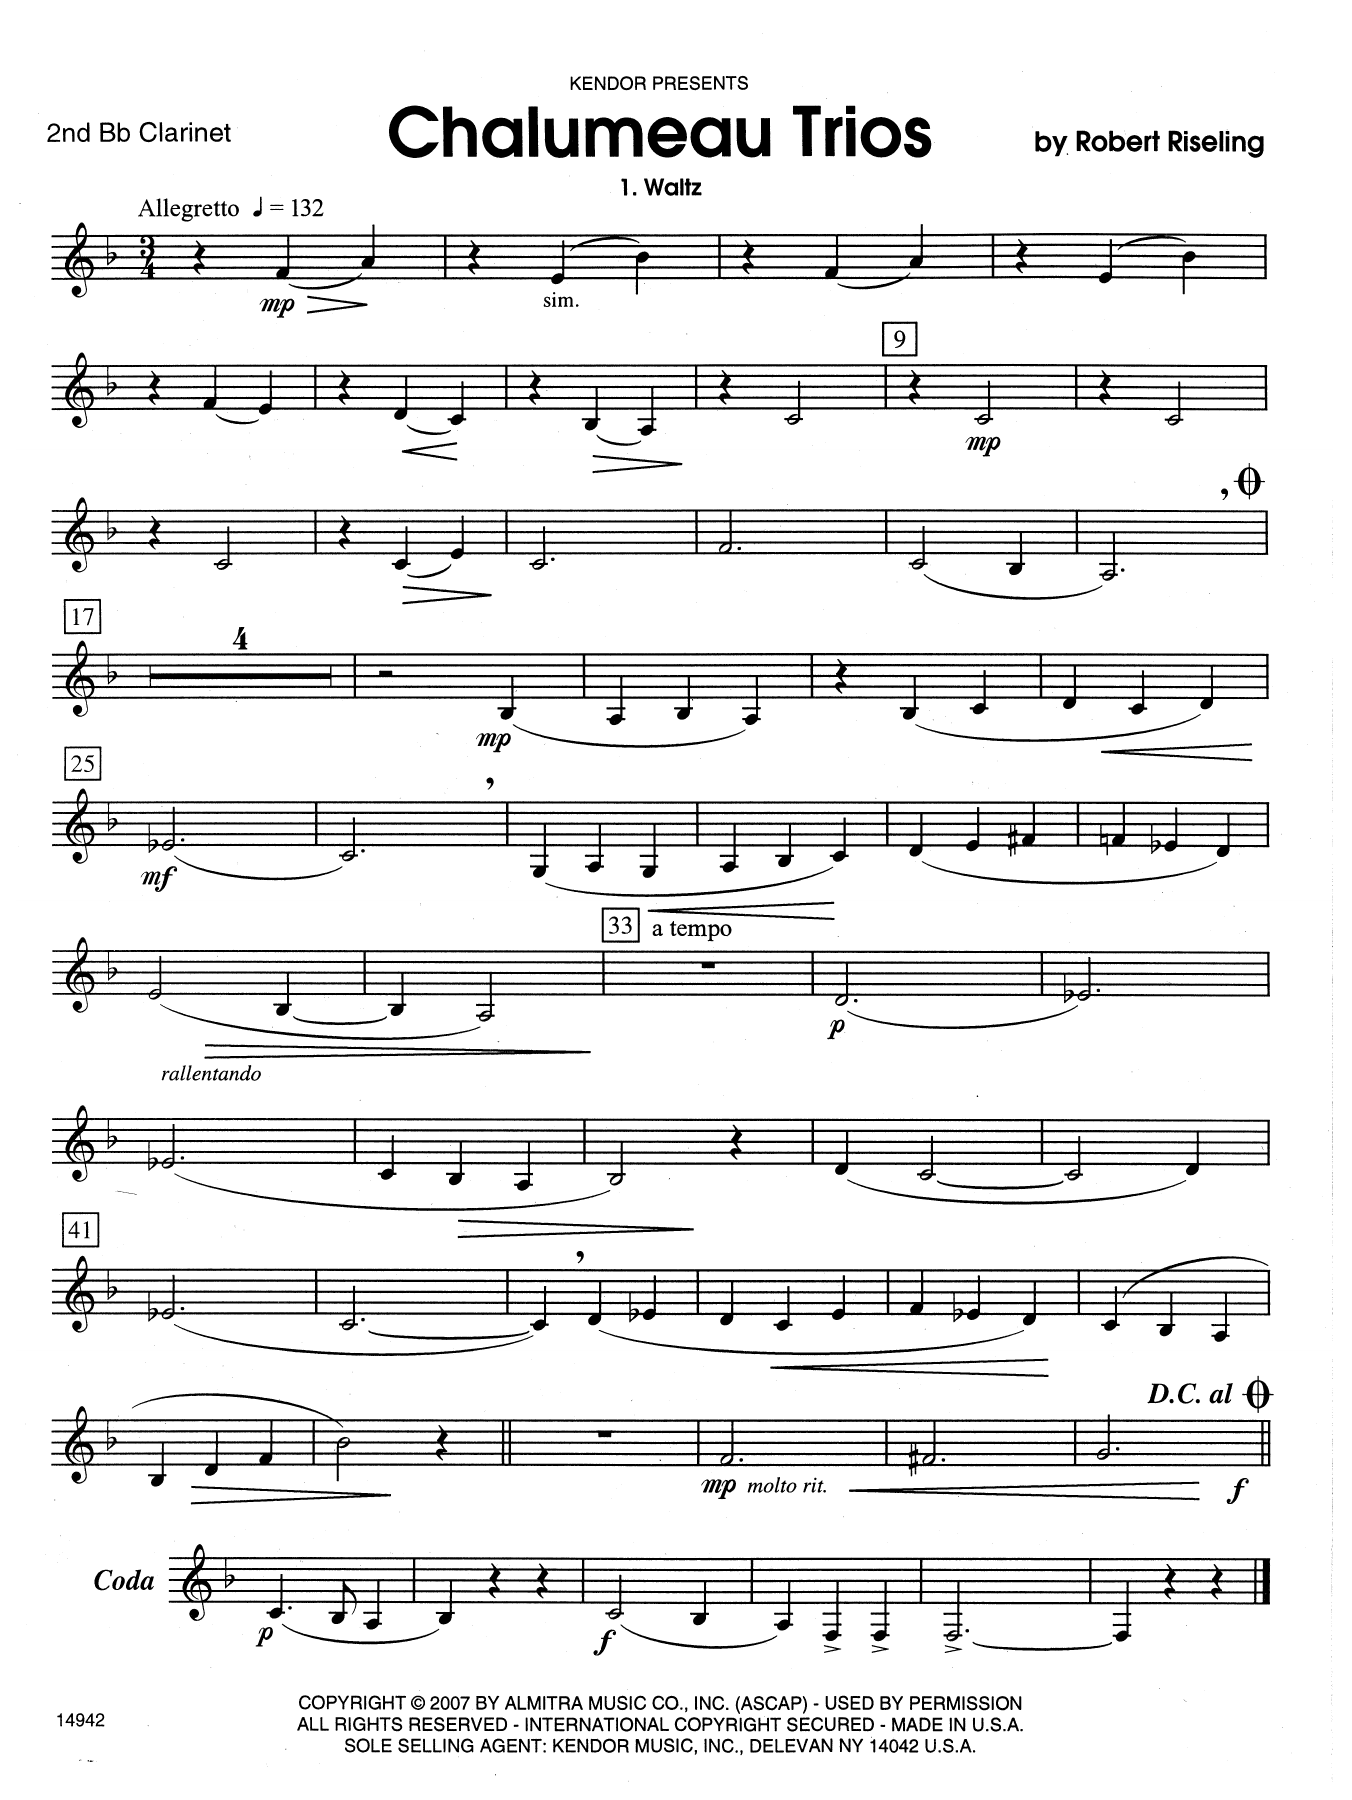 Download Riseling Chalumeau Trios - 2nd Bb Clarinet Sheet Music